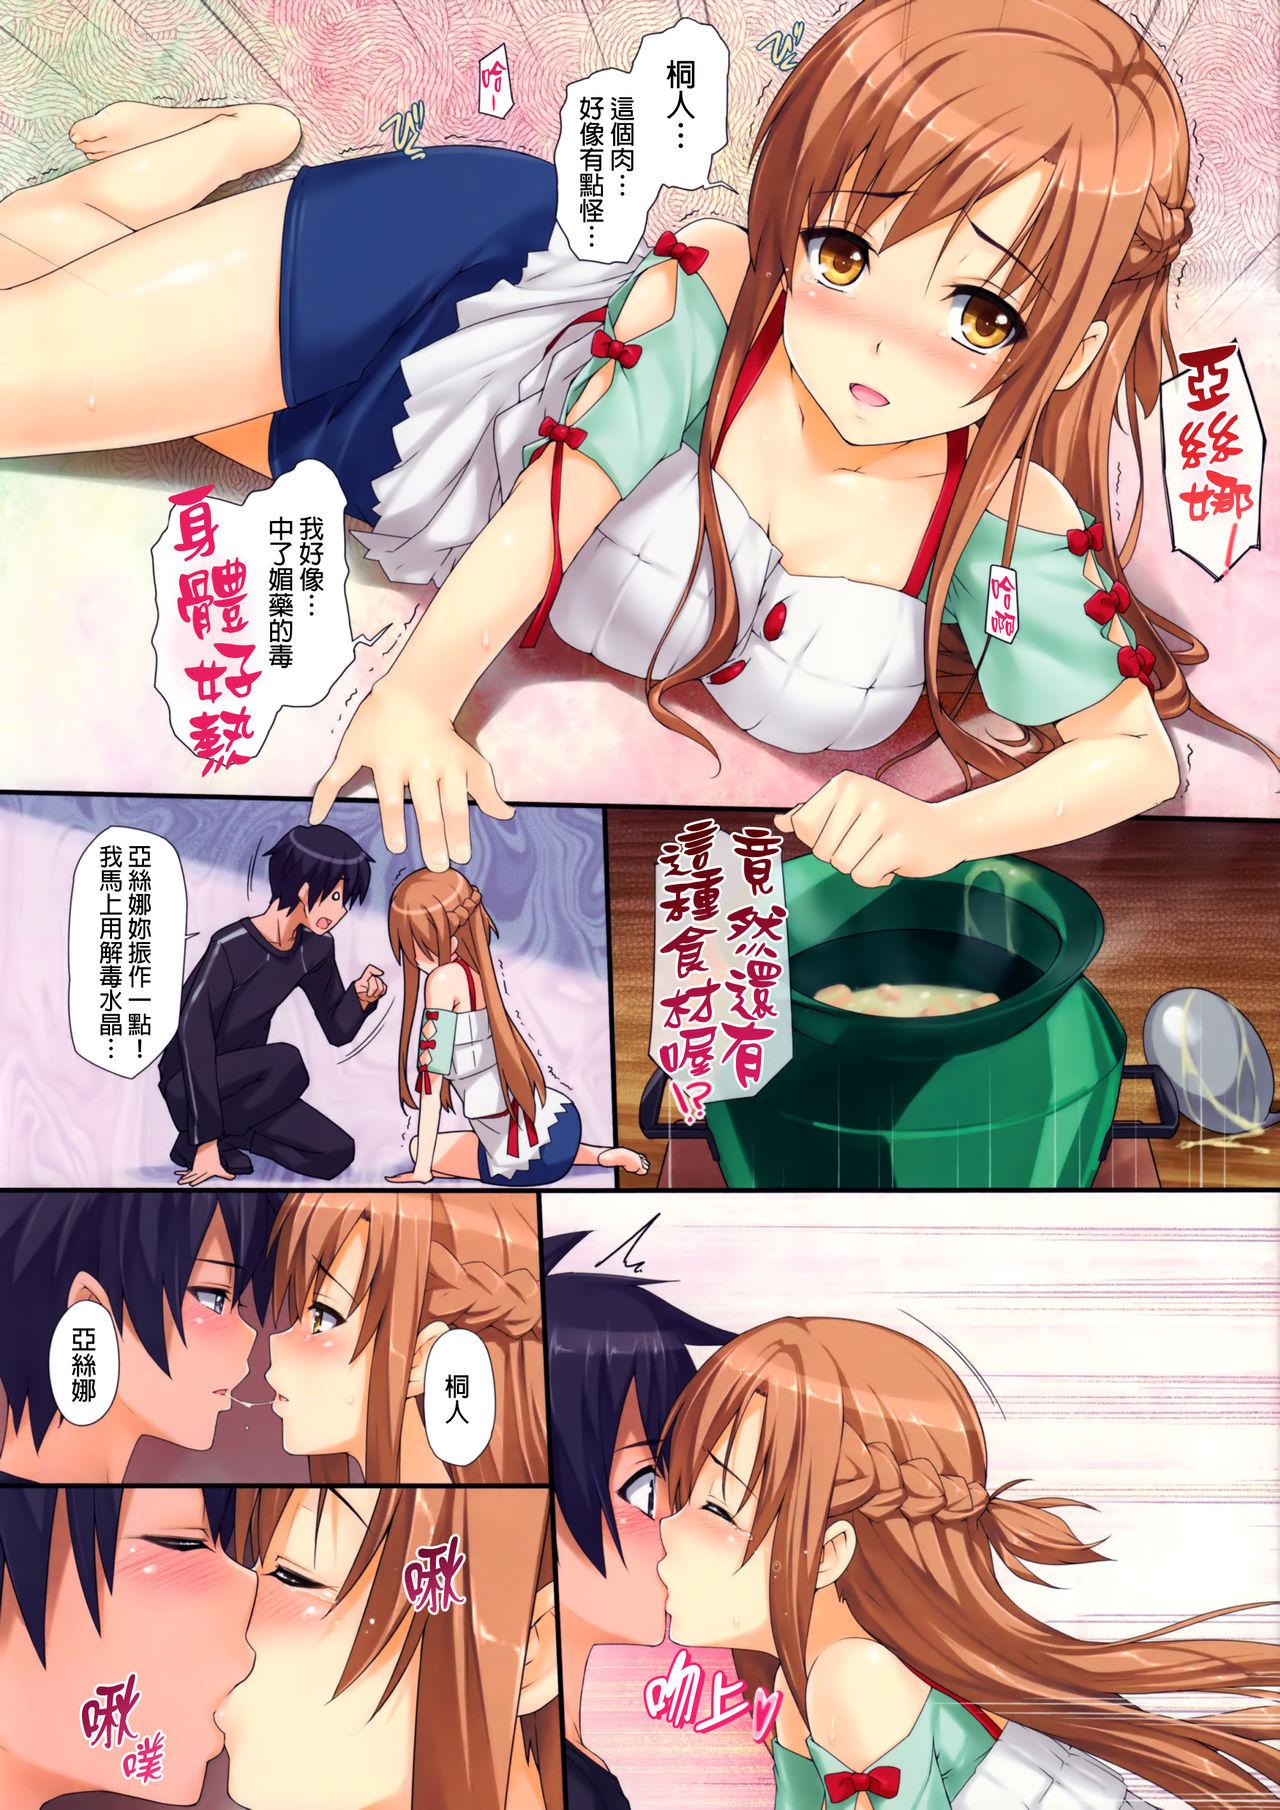 Toying Sex Again Onegai - Sword art online Spain - Page 3